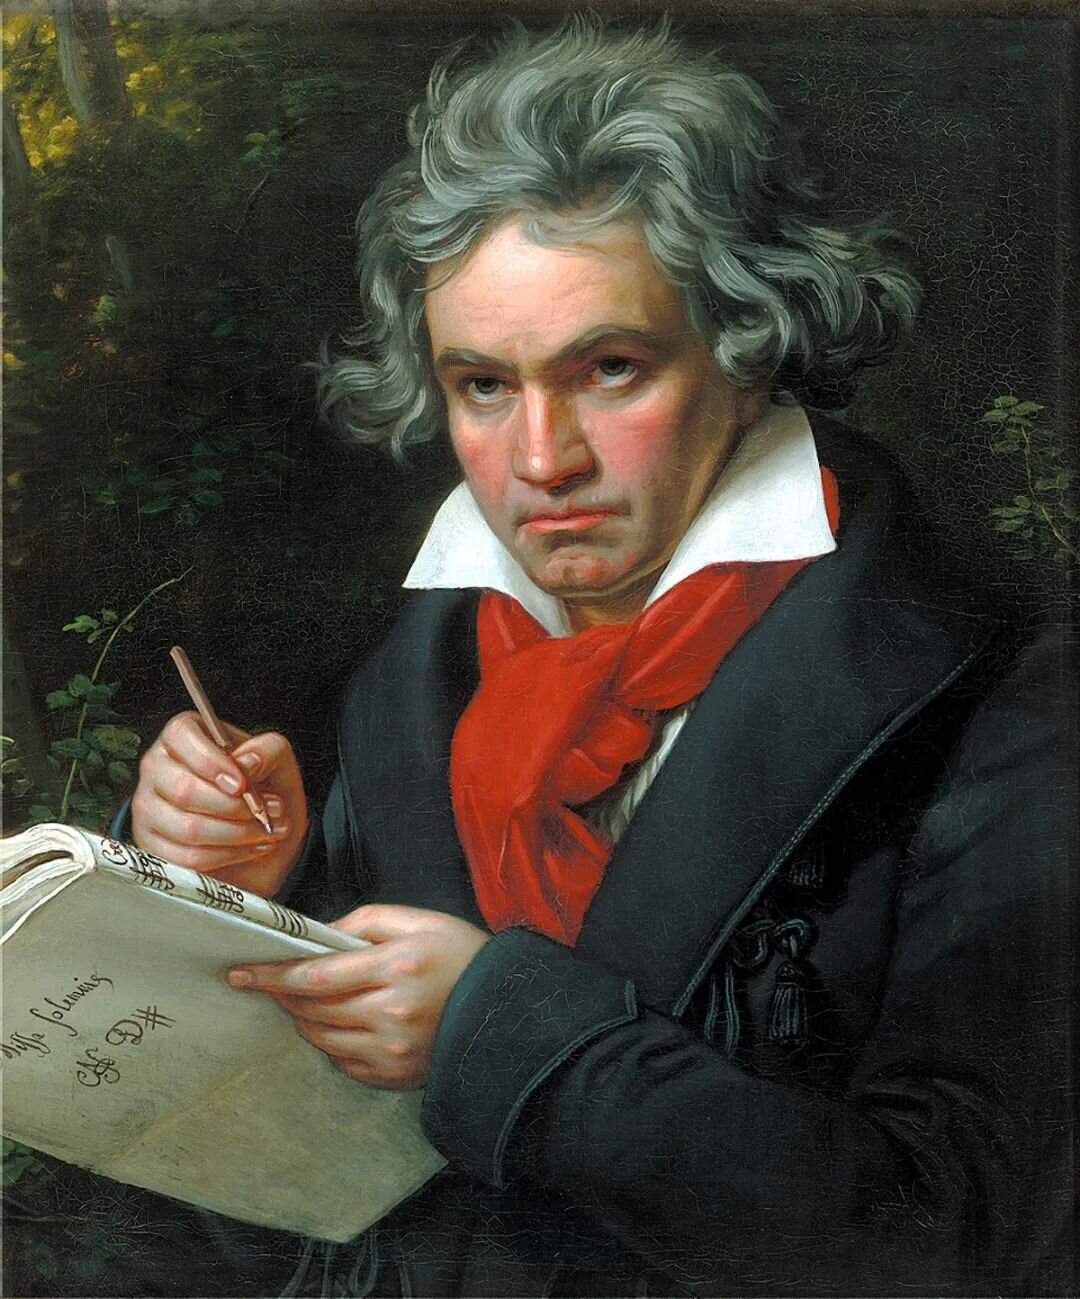 Happy 252nd birthday to Ludwig van Beethoven!
.
.
.
#beethoven #ludwigvanbeethoven #classicalmusic #composer #music #violin #piano